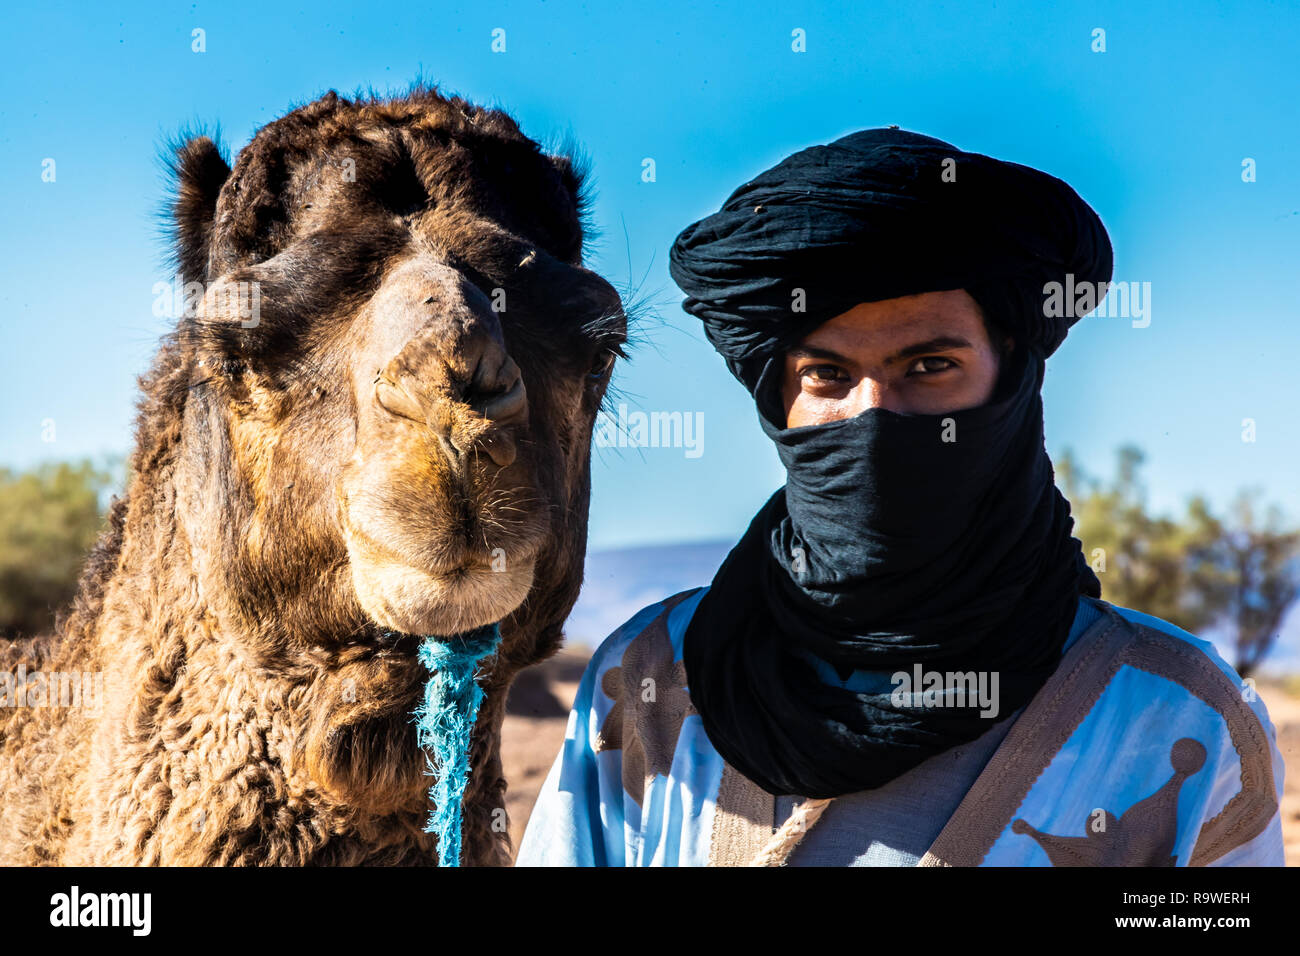 Reportage of the Maroccan desert with people, landscape, building and traditions Stock Photo